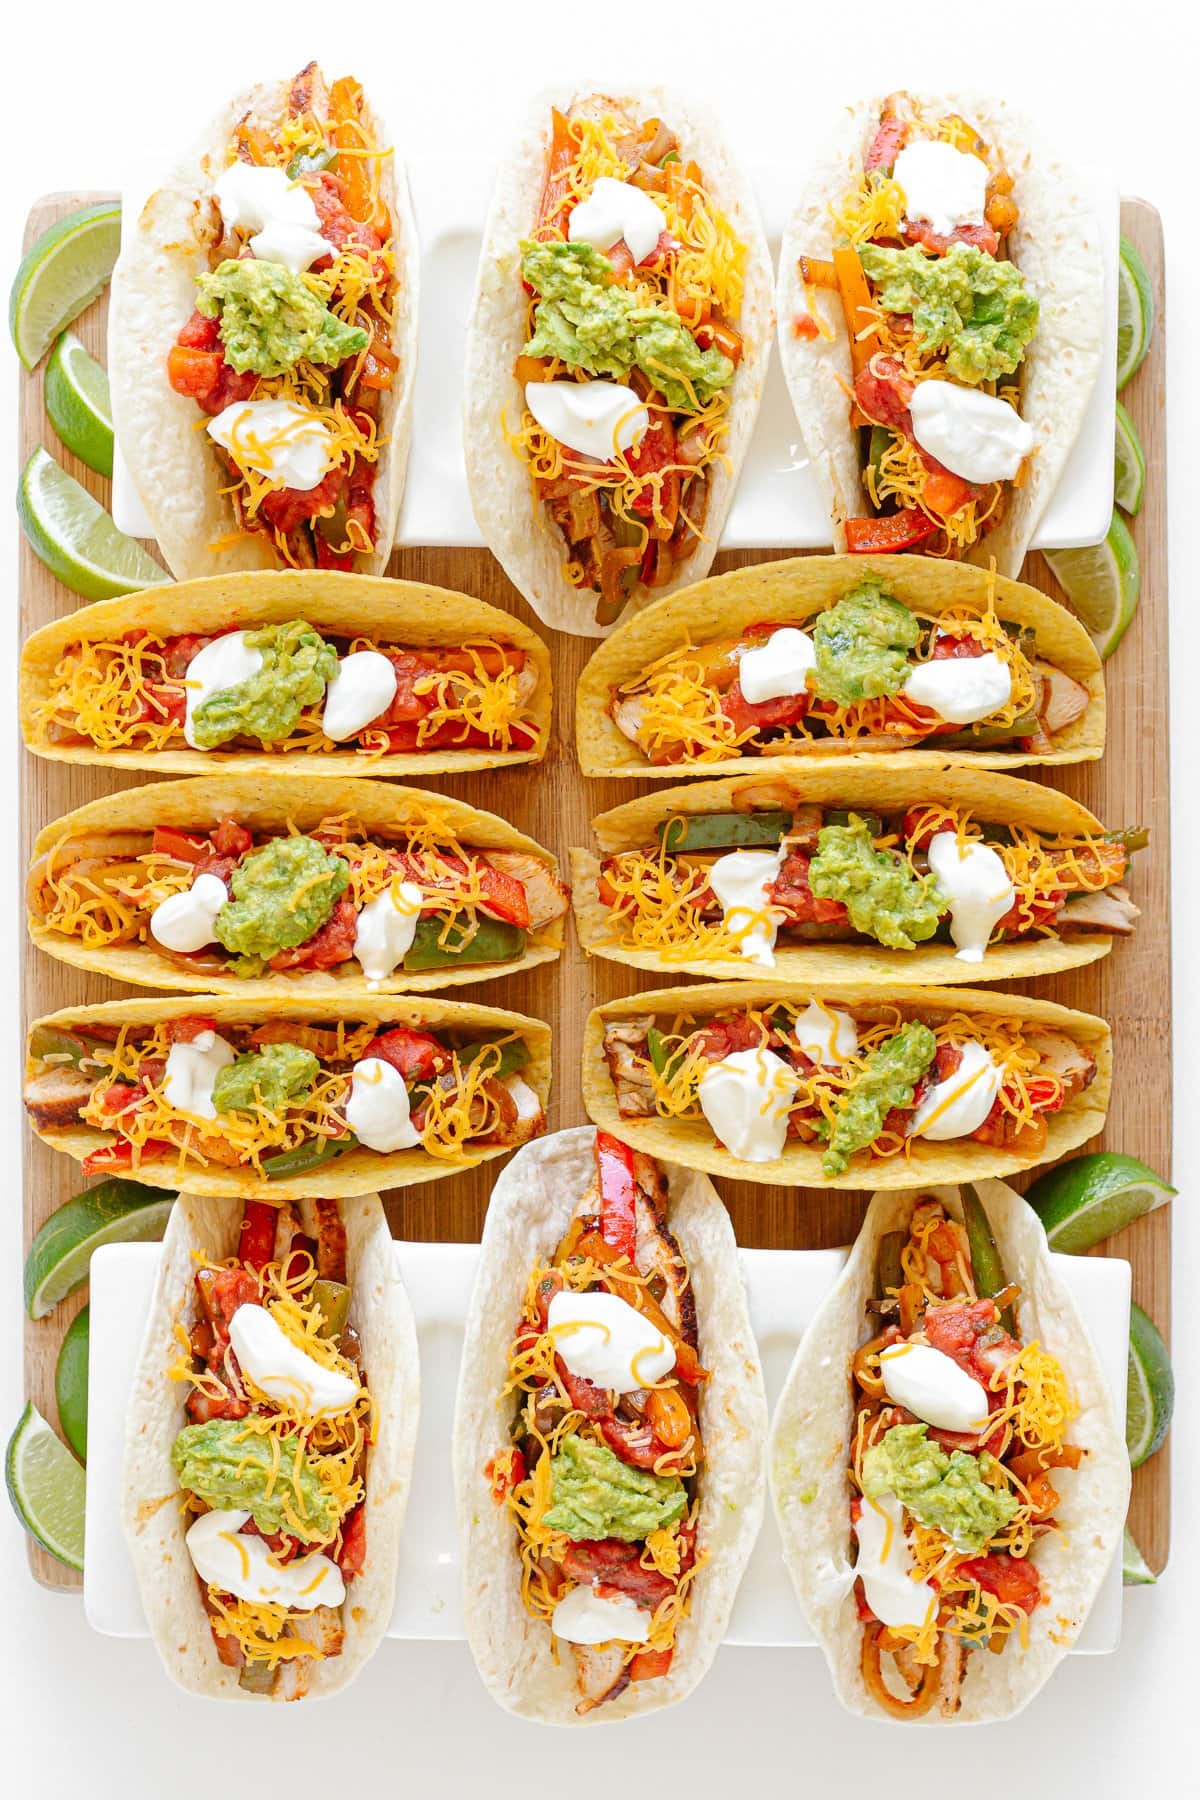 A taco board featuring a mix of soft and hard shell chicken fajita tacos.